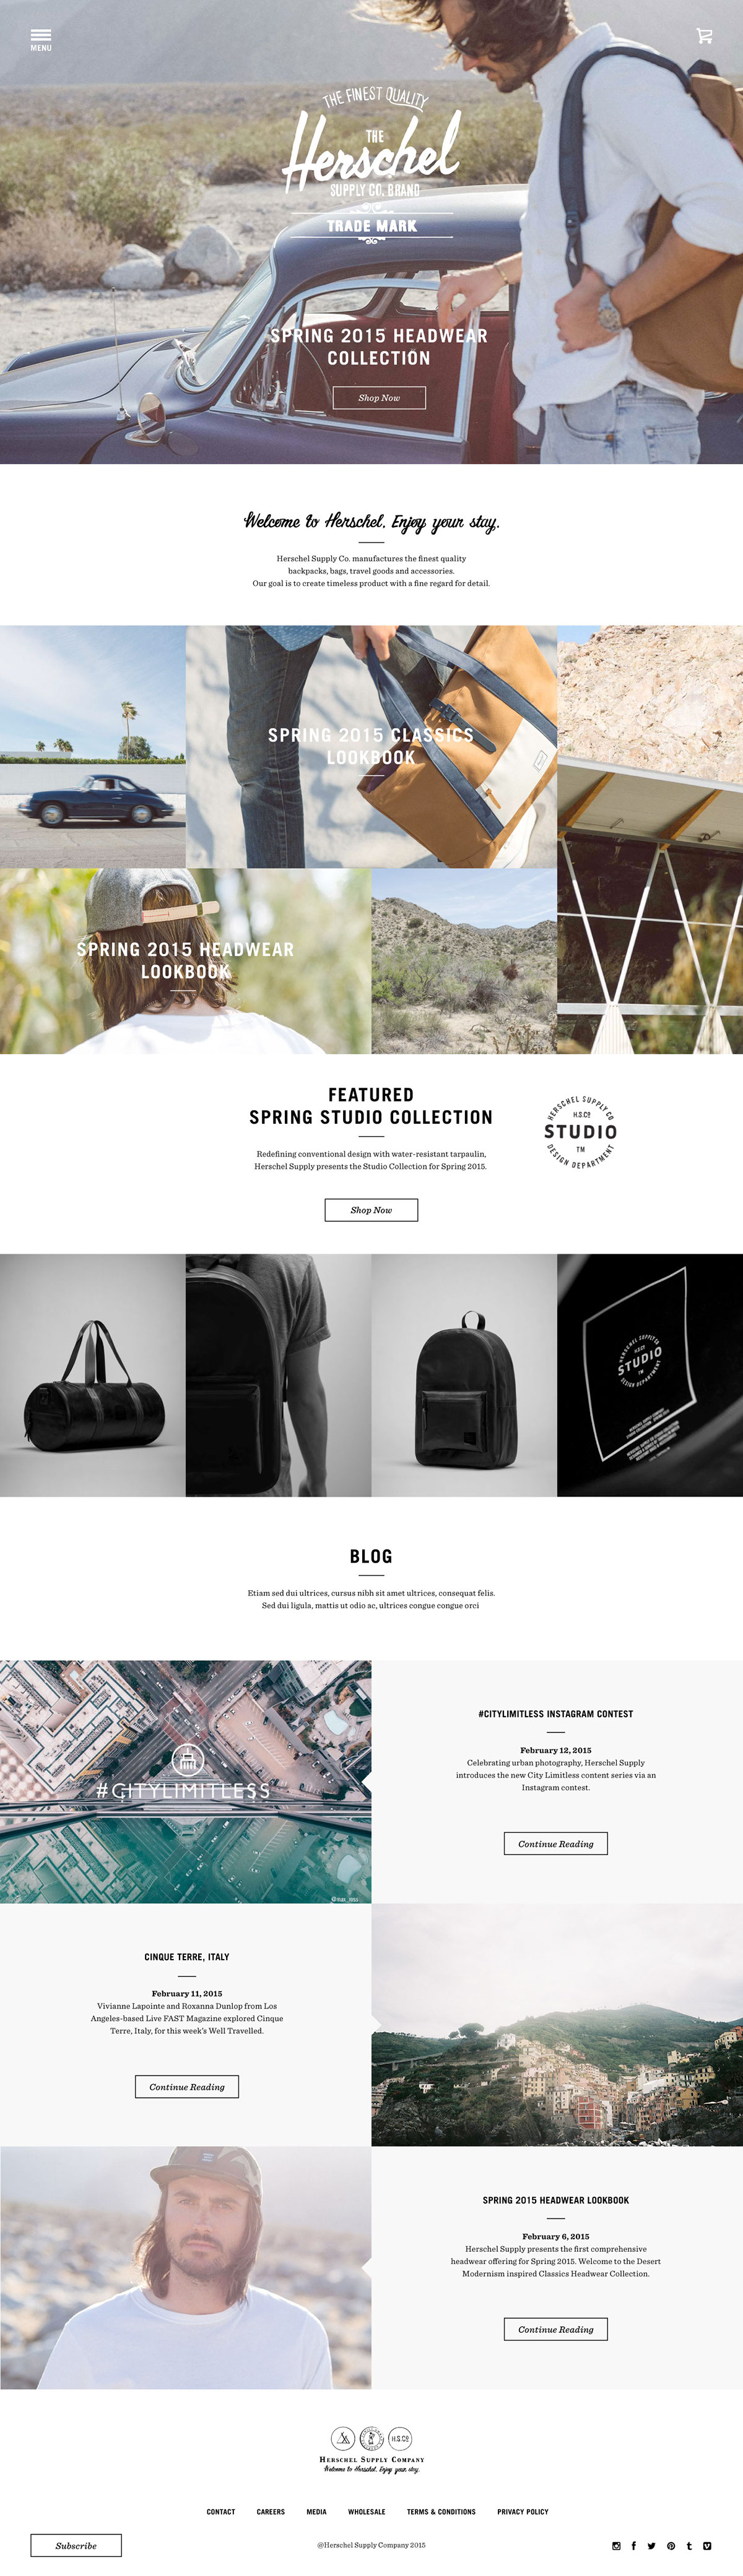 herschel e-commerce ux/ui flat design Responsive redesign concept clean minimalist Young Fullscreen image fullscreen video ghost button homepage vancouver